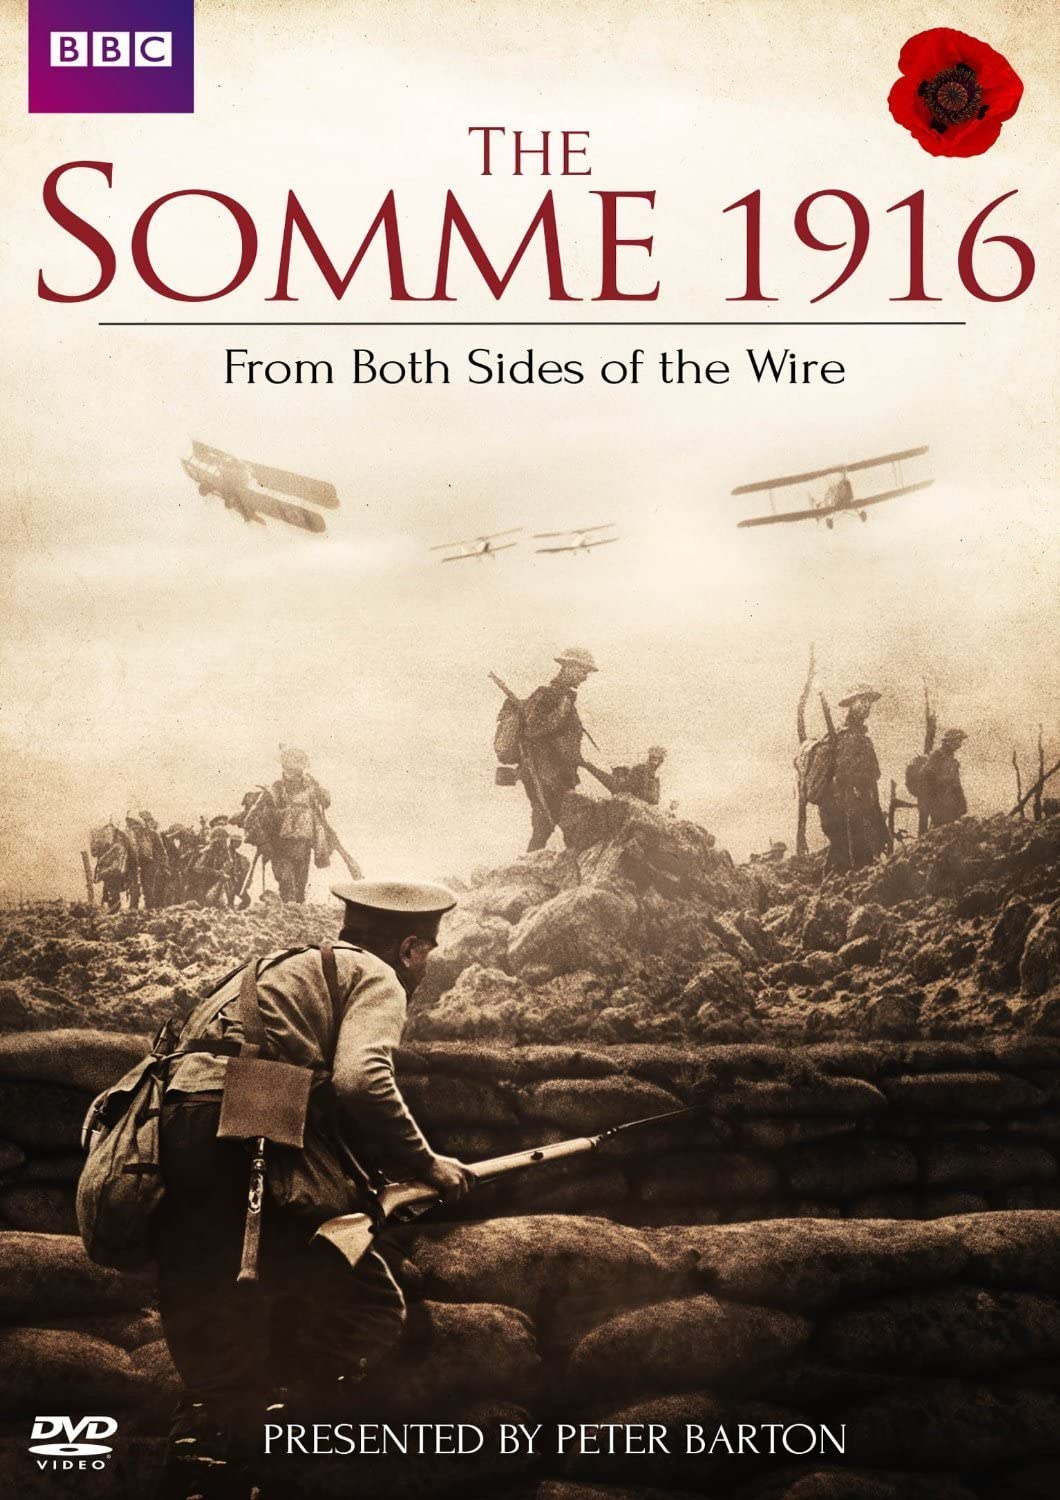 The Somme 1916 From Both Sides of the Wire